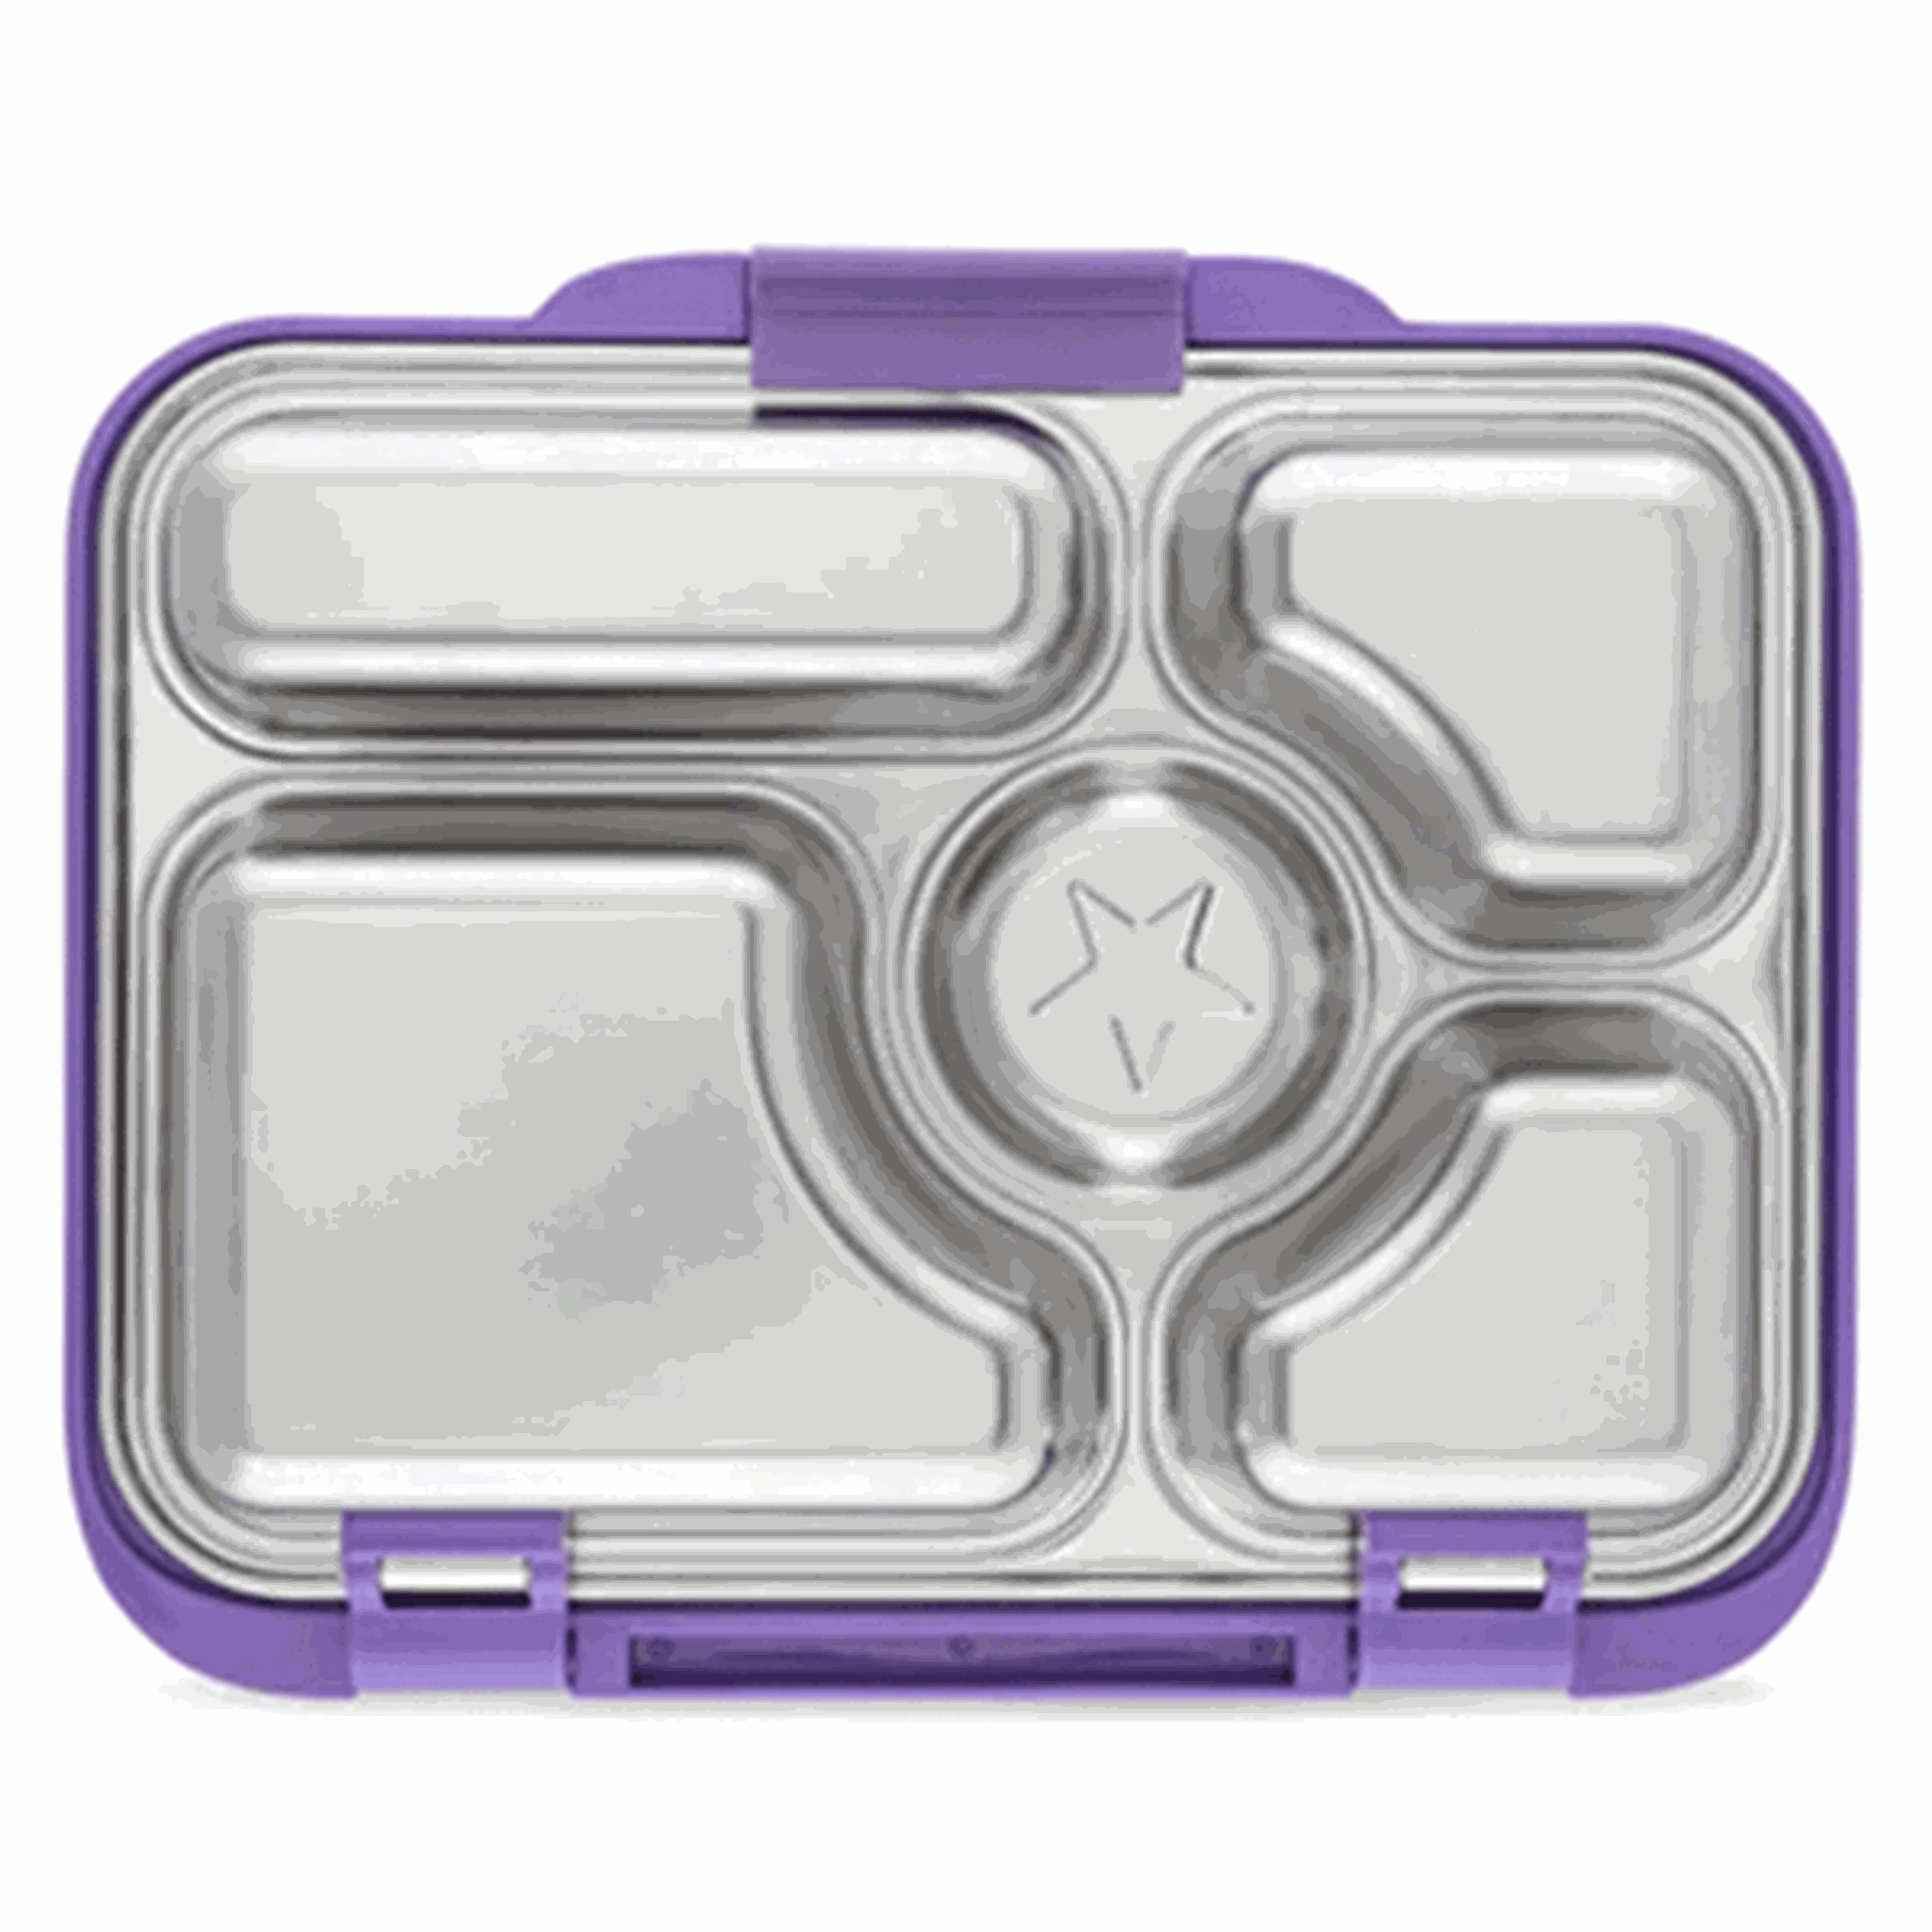 Yumbox Presto Stainless Steel Lunchlådor Remy Lavender 6